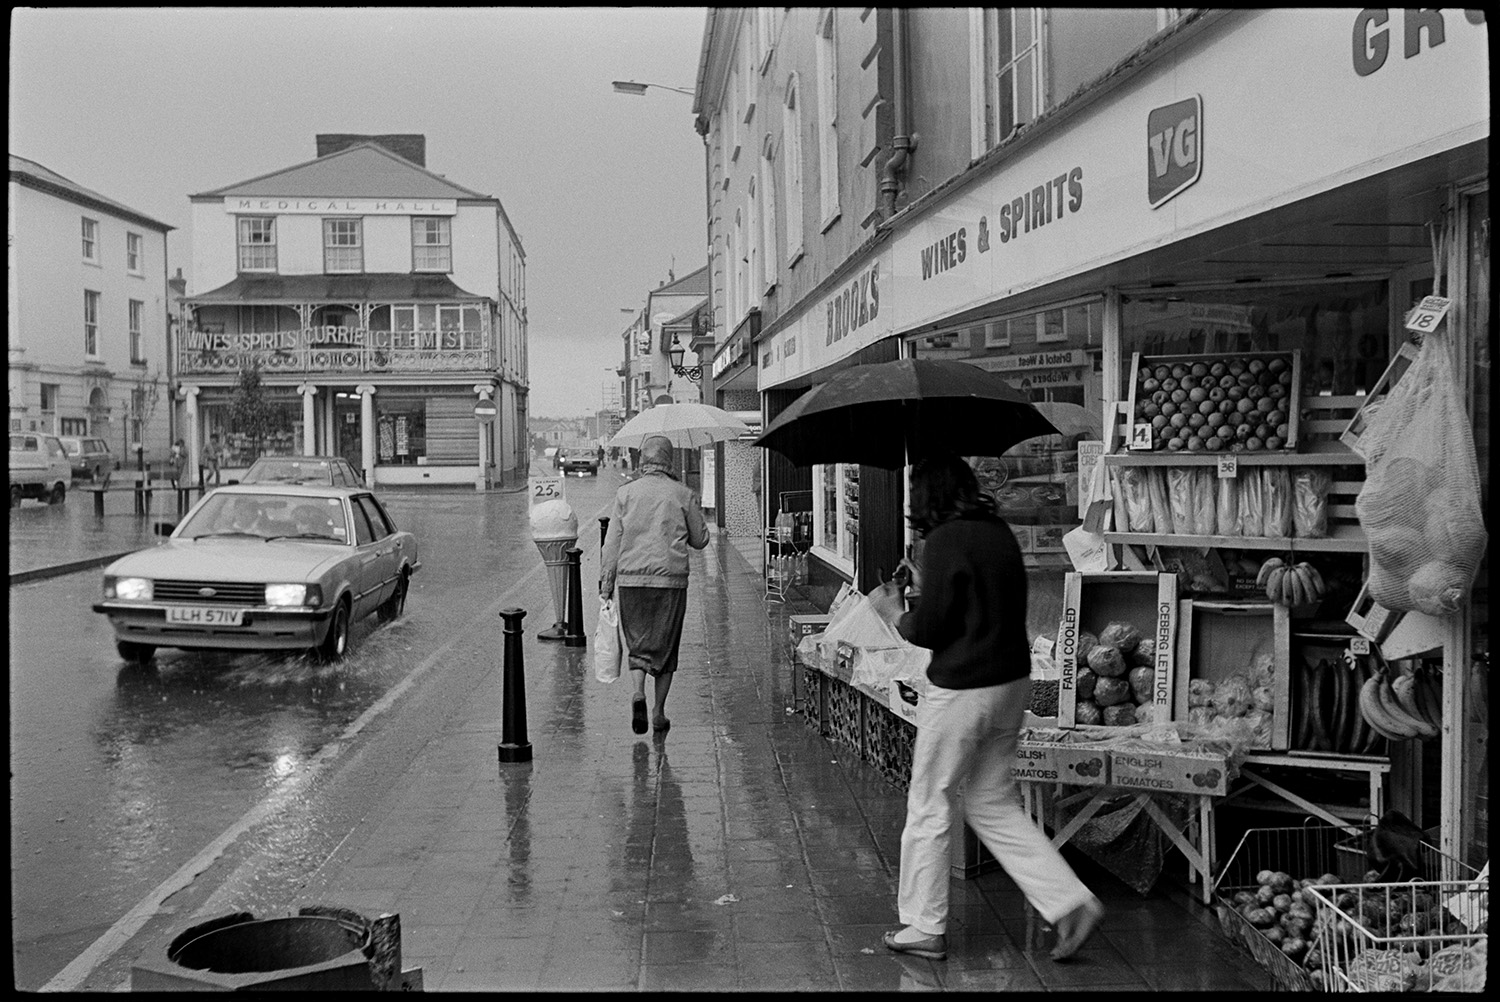 Street scene in heavy rain, umbrellas, shop fronts.
[South Molton square in heavy rain. Pedestrians with umbrellas are walking on the pavement alongside a car splashing through a puddle on the road. Brooks shop front with boxes of fruit and vegetables on display is visible and the Medical Hall with Currie's chemists shop is in the background.]